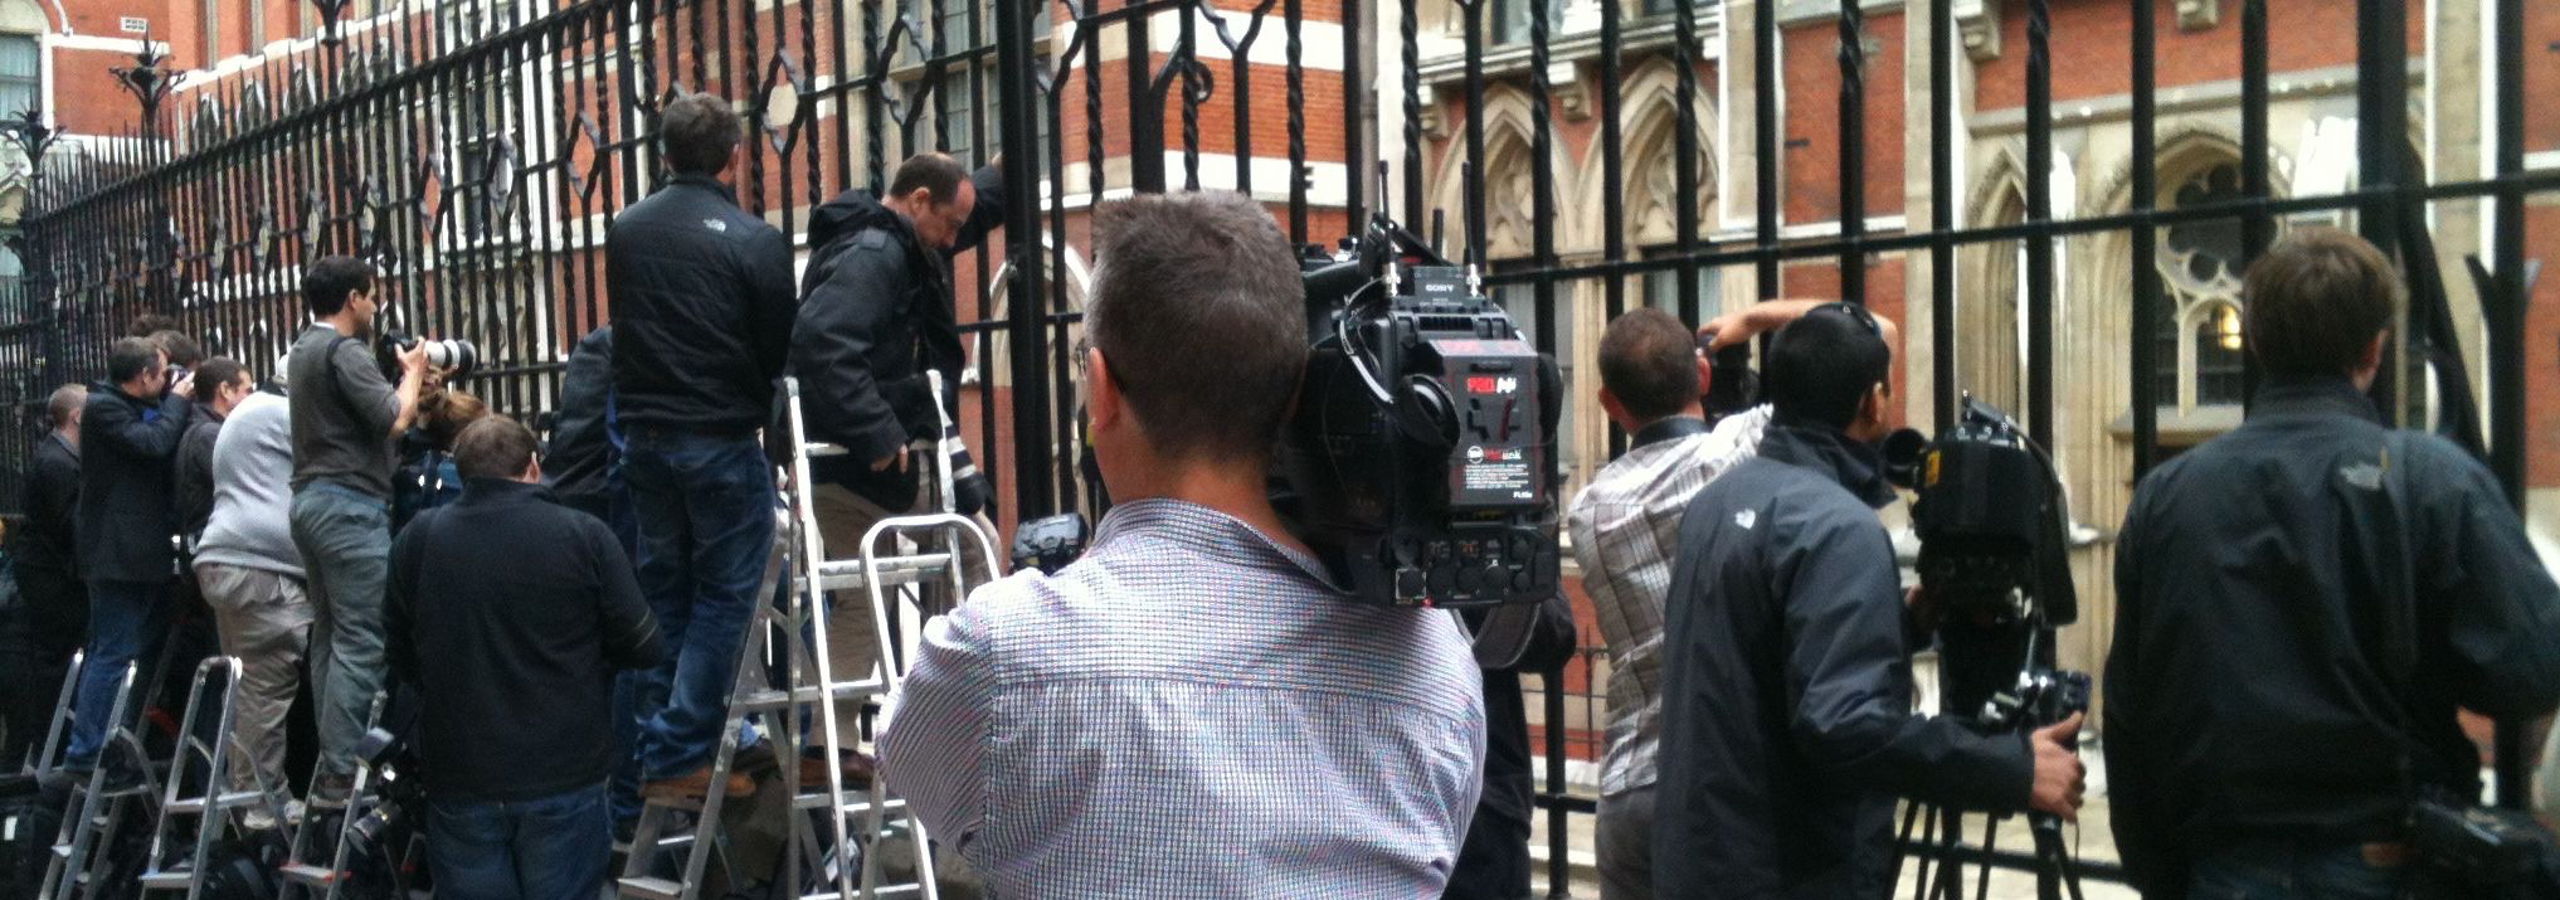 Dixipix TV - Royal Courts of Justice